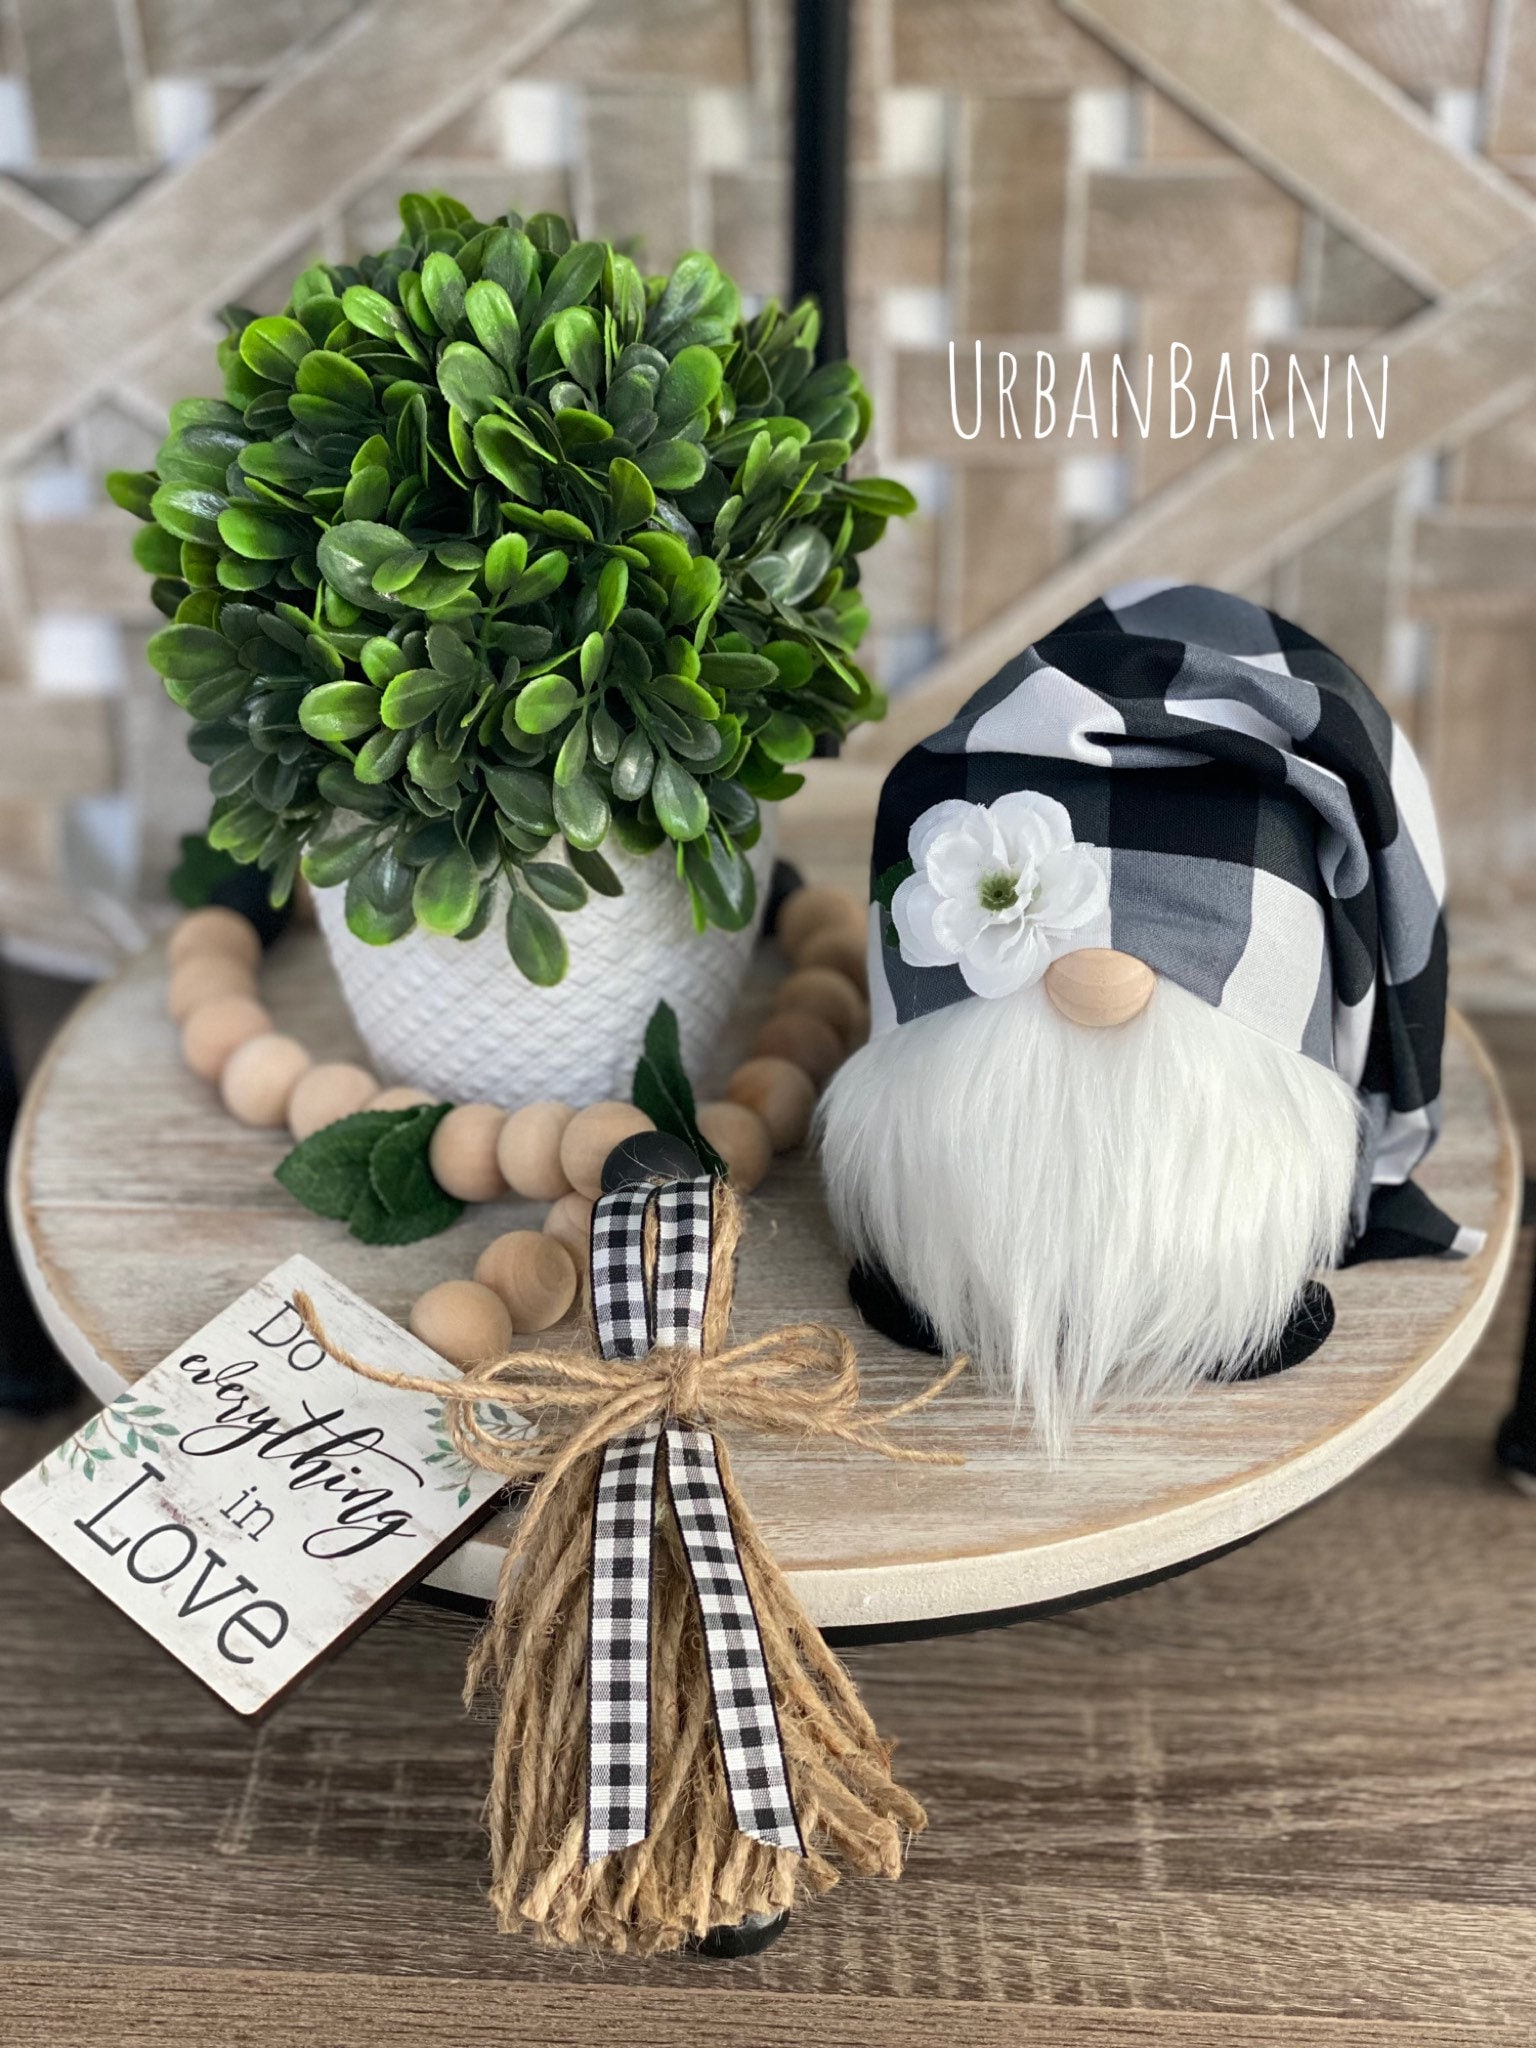 Lavender Swedish Gnomes Decorations for Home Pastel Purple Spring Summer  Tiered Tray Tomte Plush Decor Nordic Dwarf with Artificial Greenery Kitchen